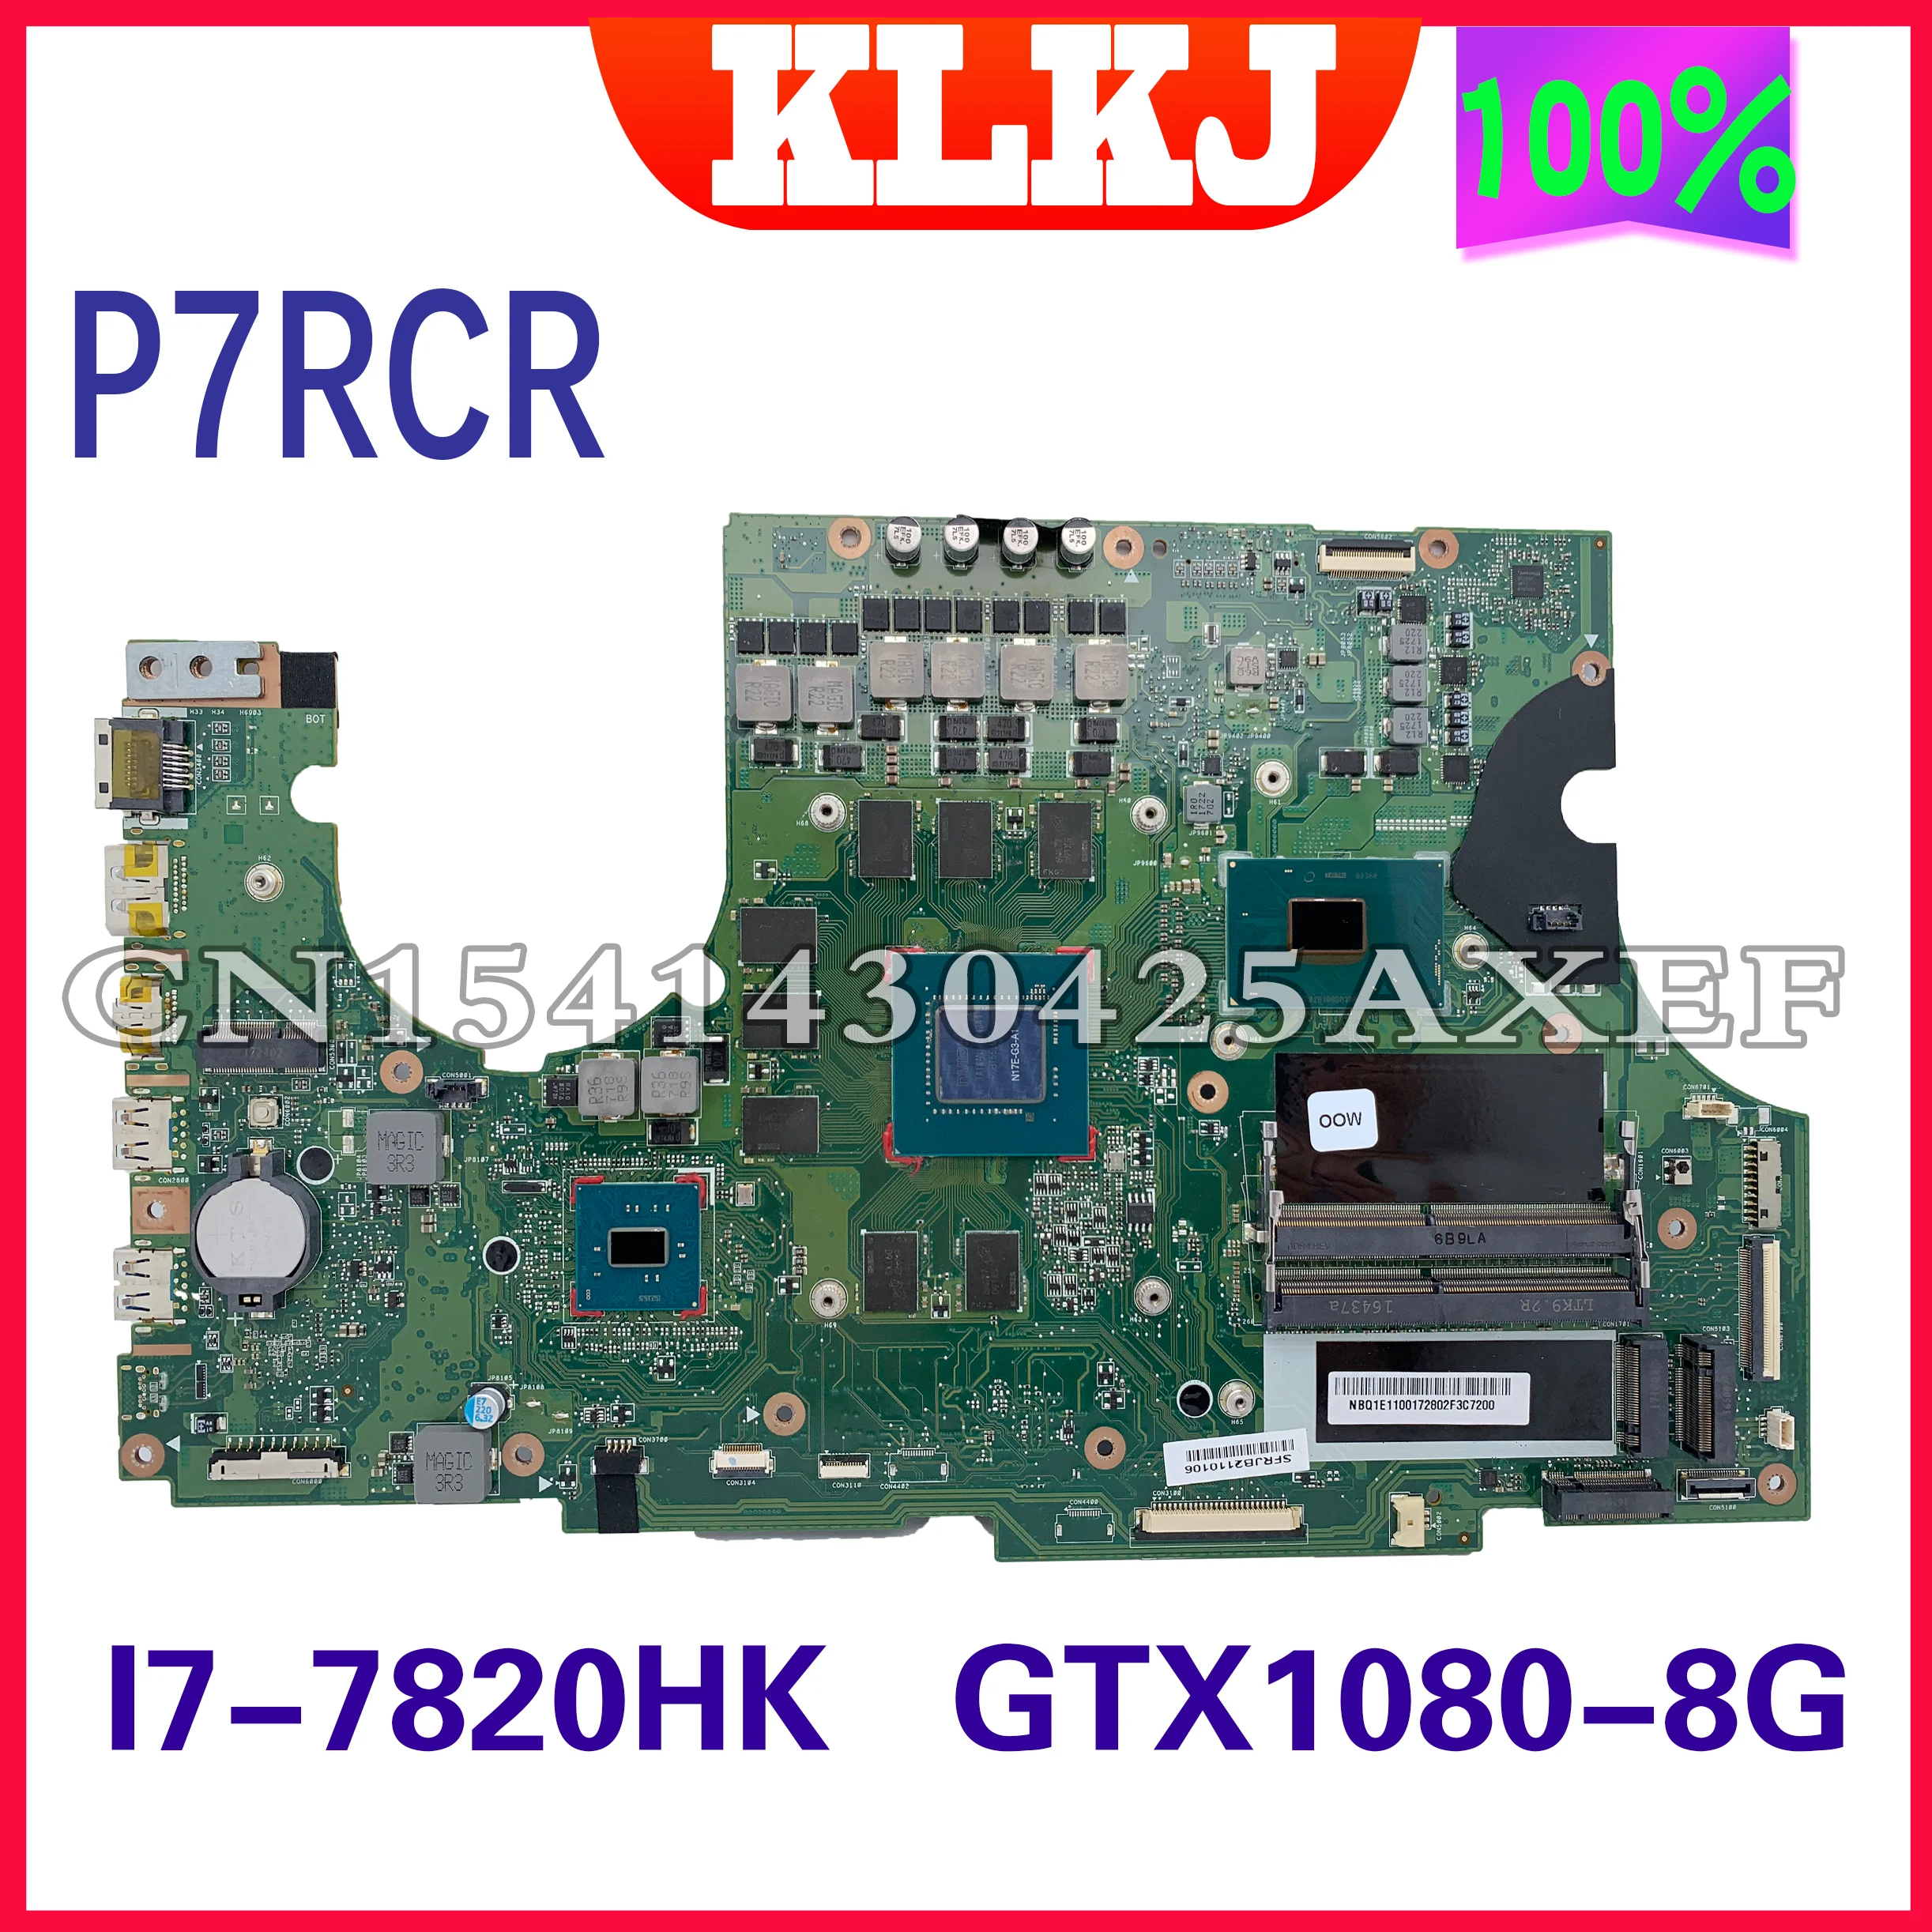 

Dinzi Predator 17X GX-792 Mainboard For Acer Predator P7RCR Laptop Motherboard With I7-7820HK GTX1080M-8G 100% Fully tested